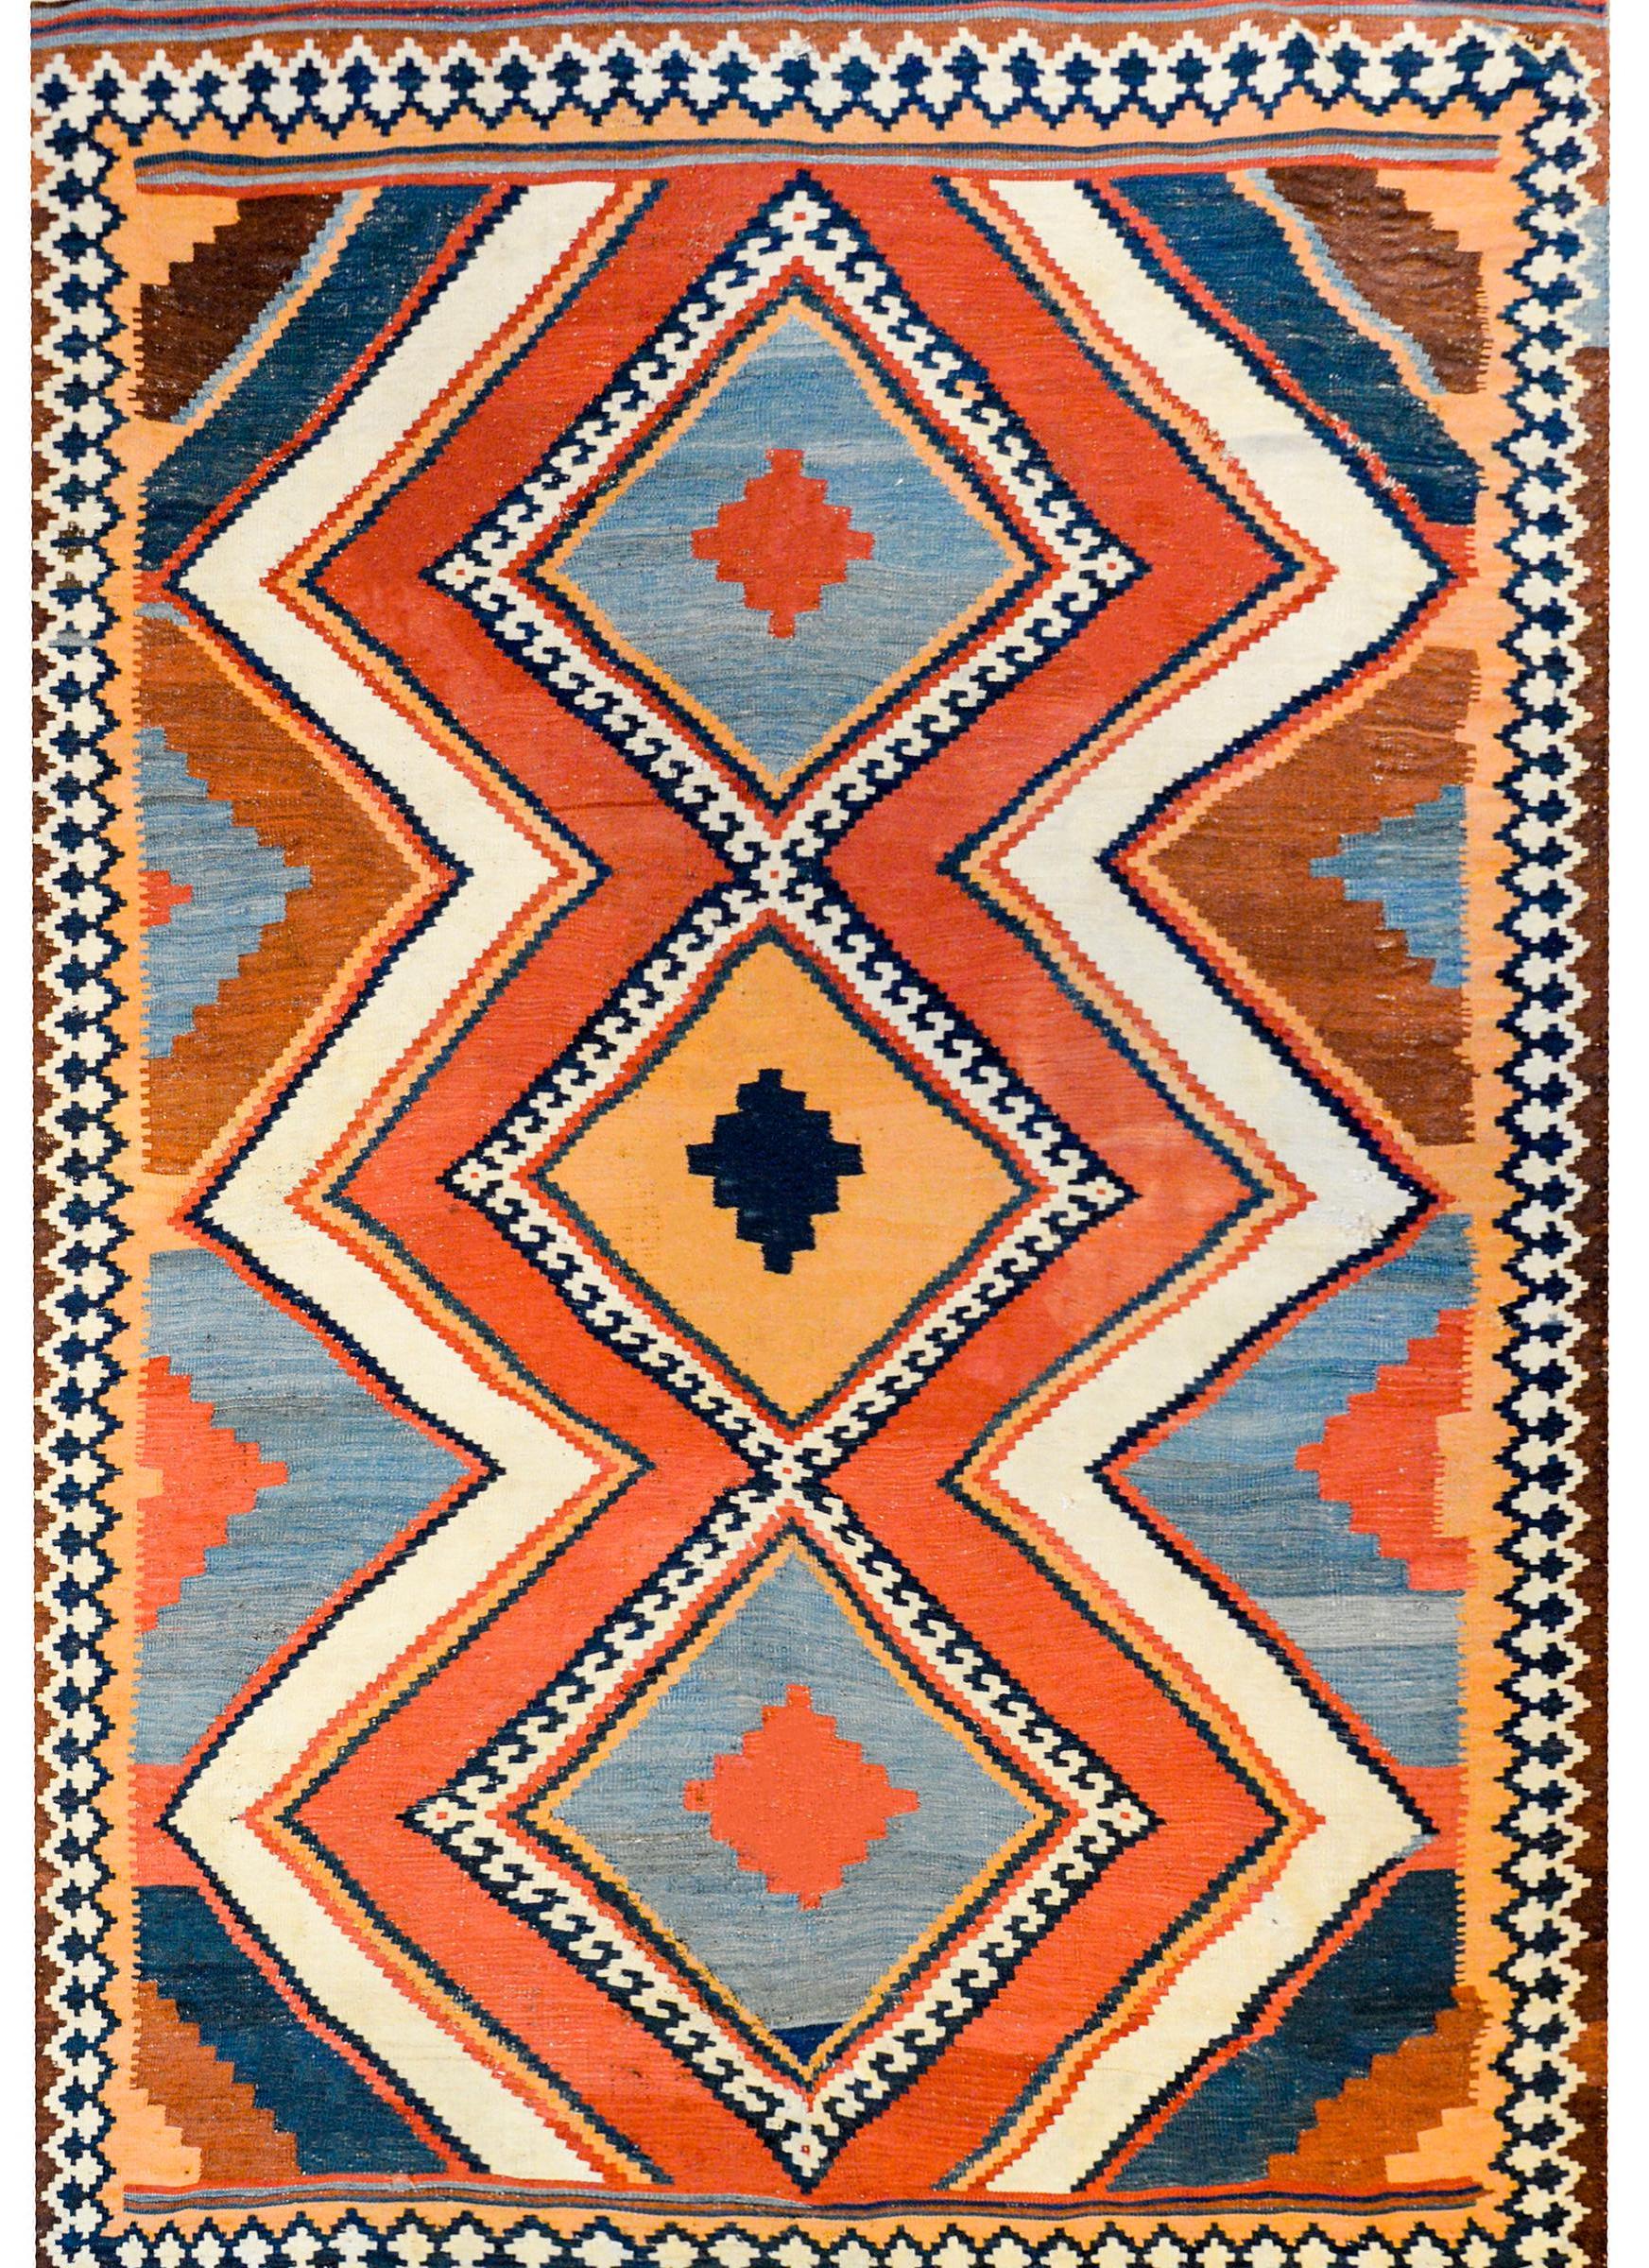 A wonderful early 20th century Persian Shiraz kilim rug with three large diamond medallions flanked by wide zigzags woven in indigo, orange, crimson, black, and white vegetable dyed wool surrounded by even more multicolored zigzag stripes.